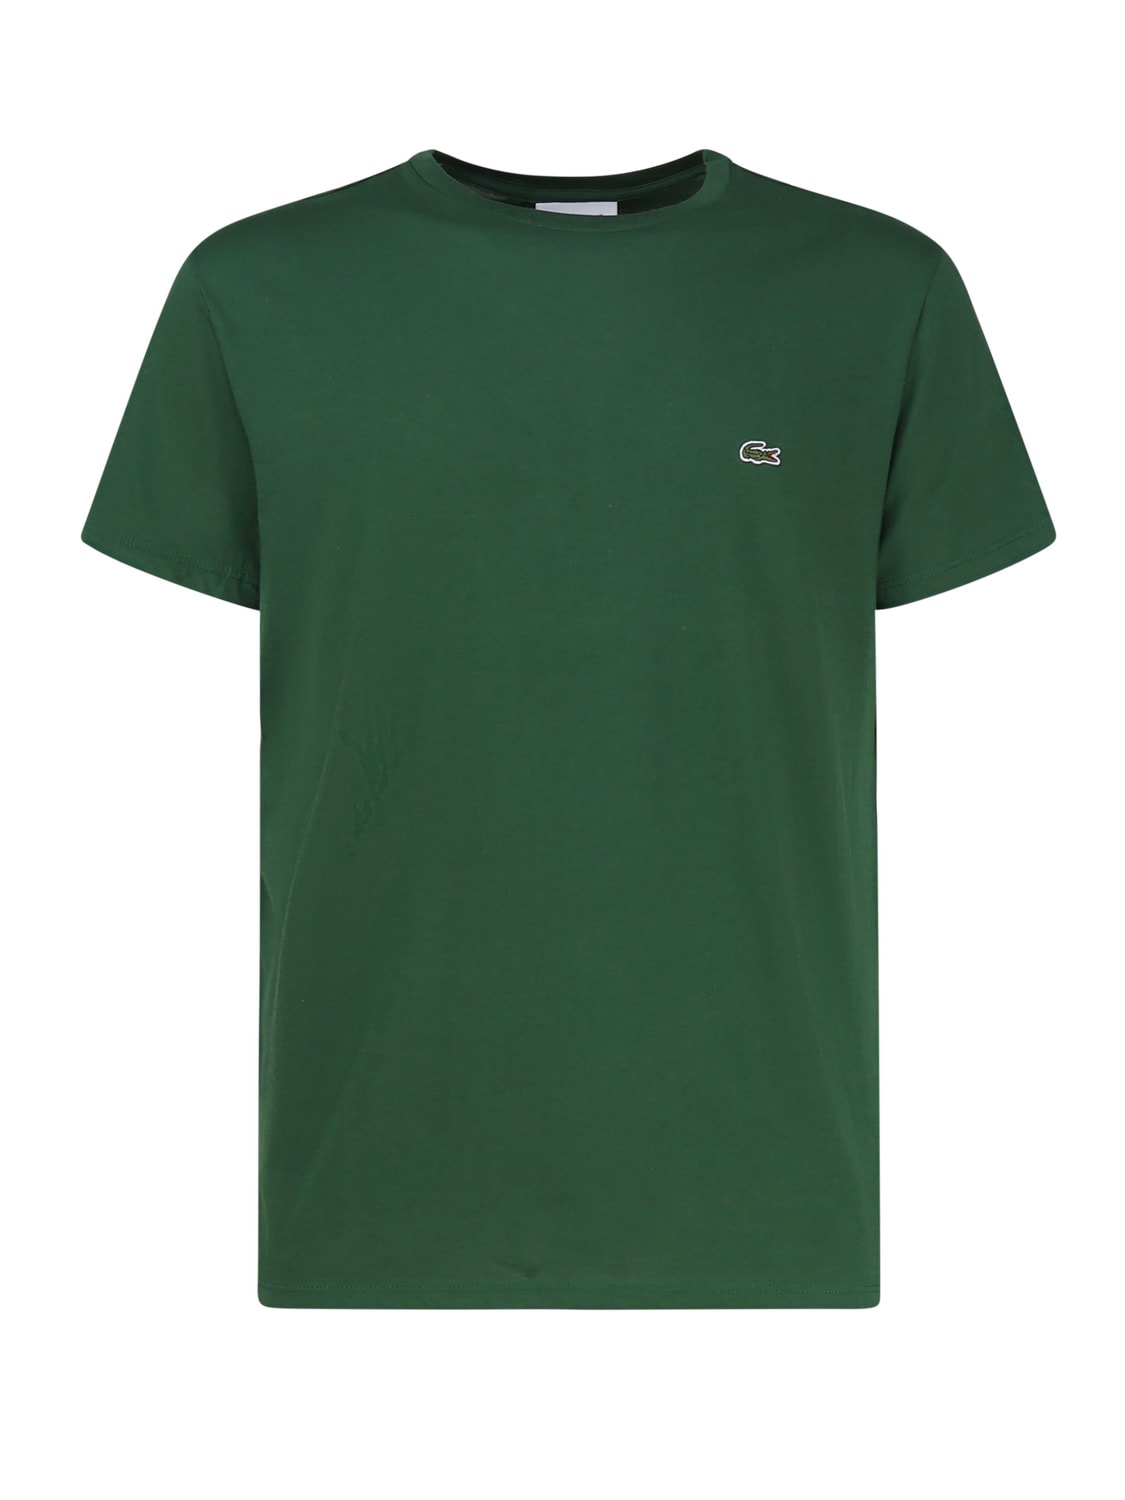 Shop Lacoste Green T-shirt In Cotton Jersey